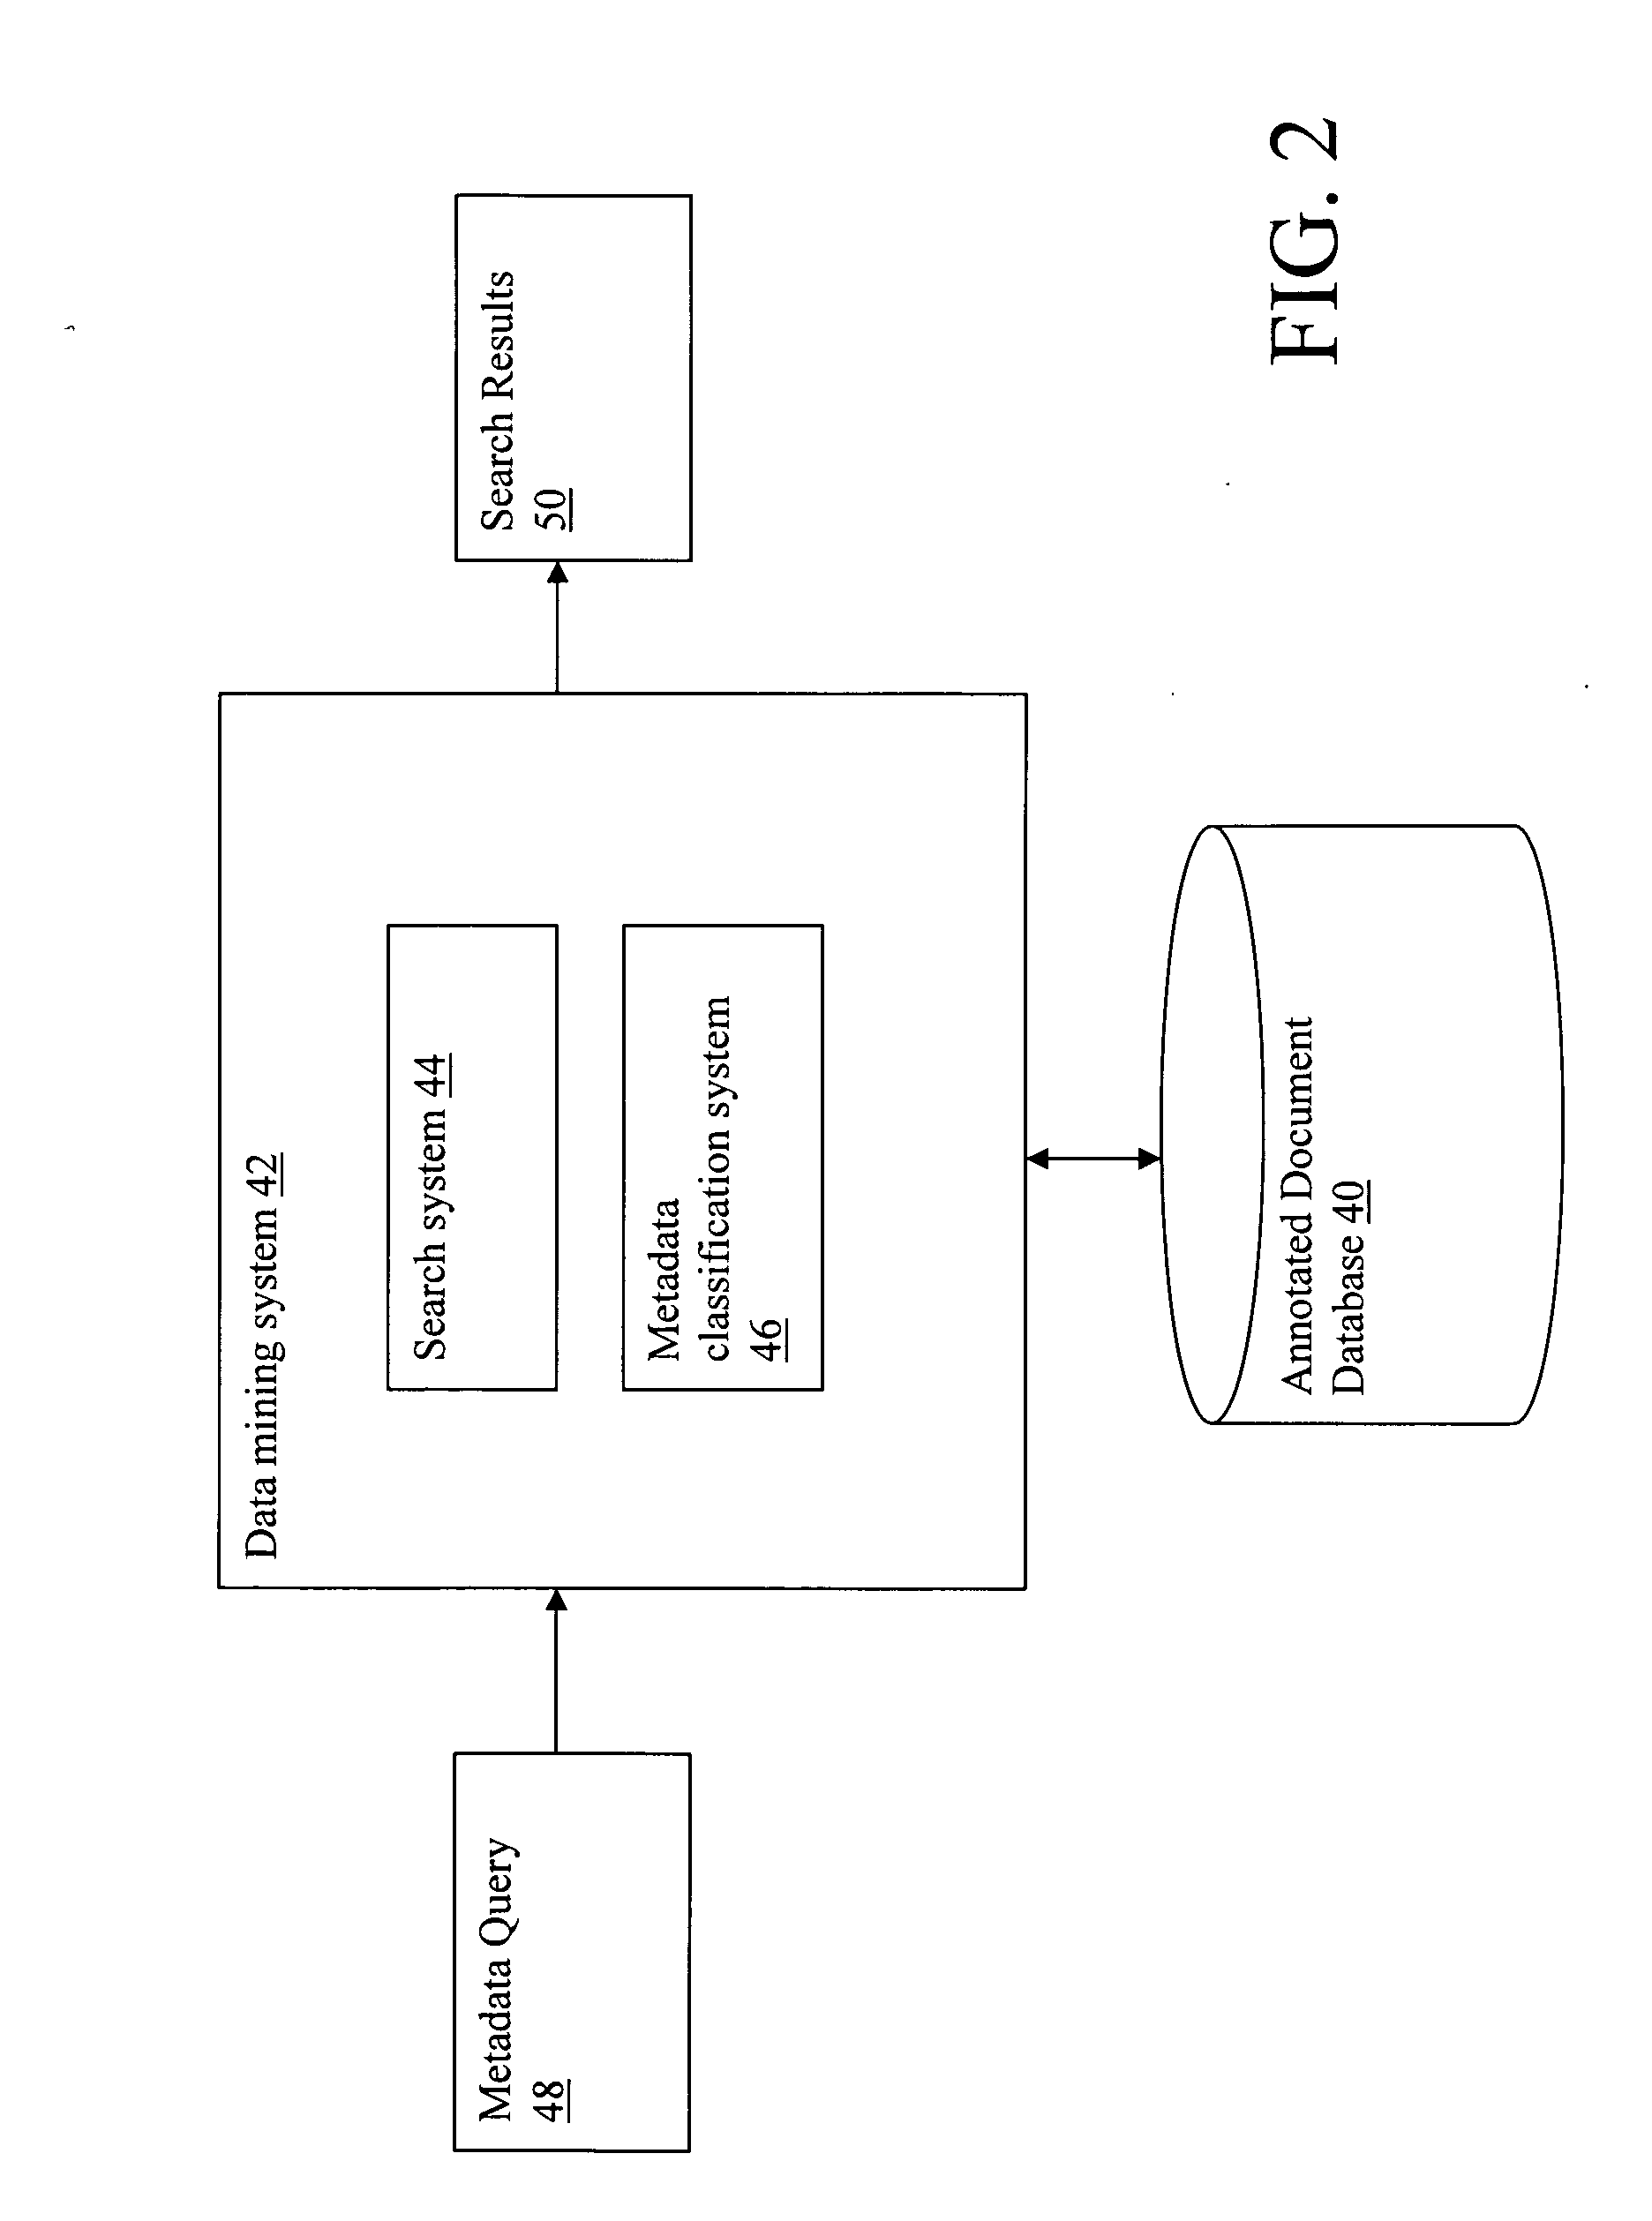 System and method for using text analytics to identify a set of related documents from a source document